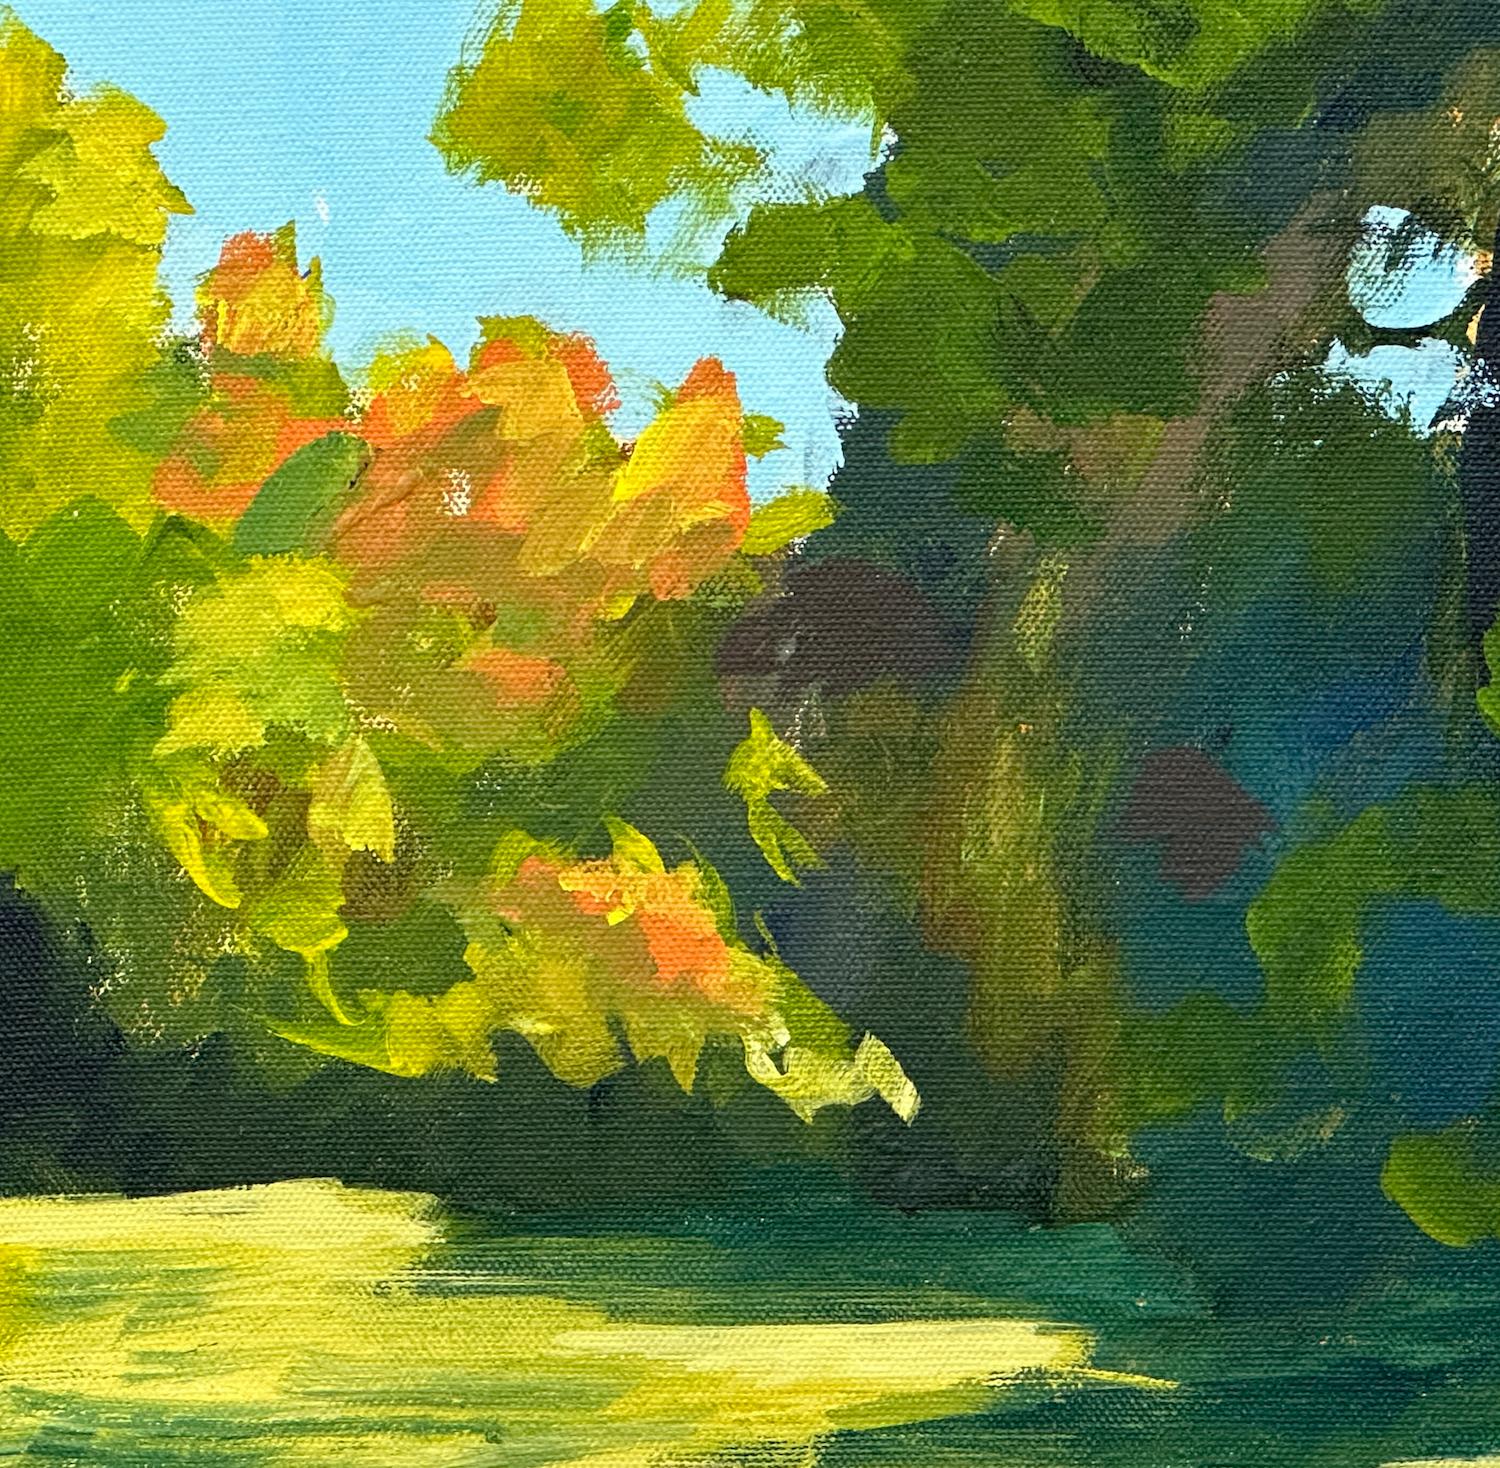 <p>Artist Comments<br>At times, seemingly ordinary landscapes reveal themselves as works of art. Just as the foliage dances between light and shadow, with leaves enjoying the sunlight and trunks concealing themselves in shades, bold strokes capture